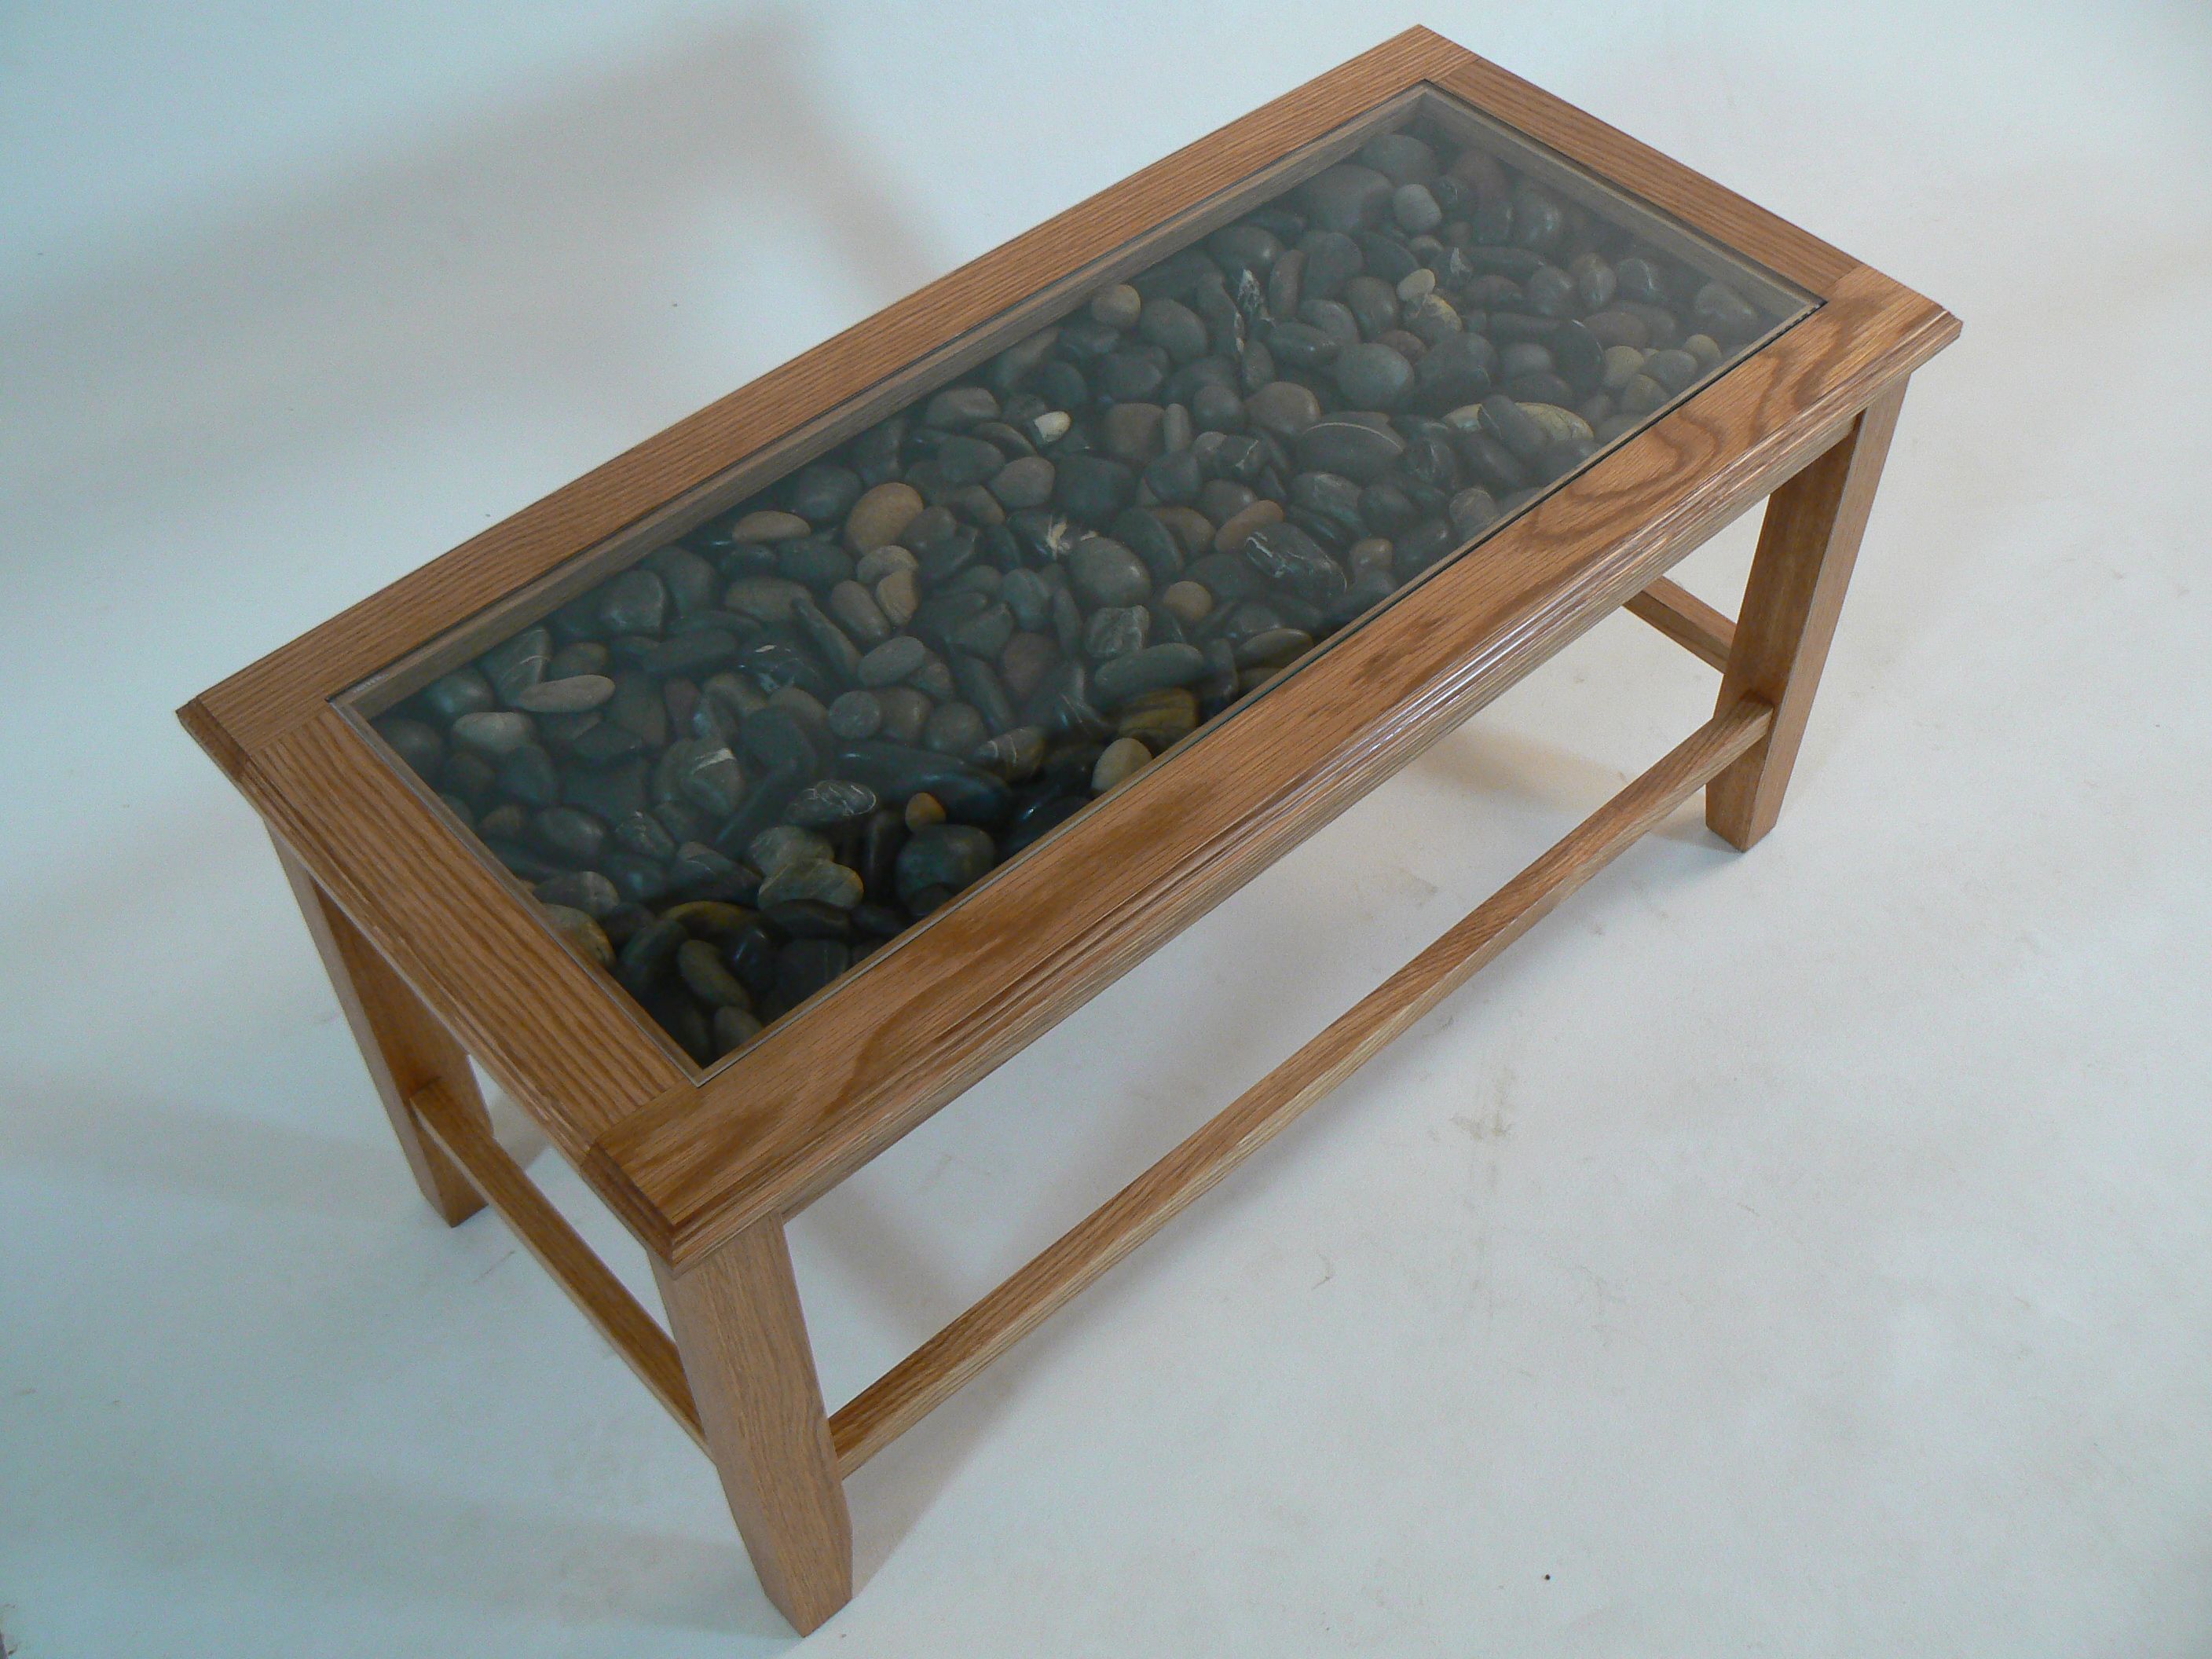 Wood With Glass Top Coffee Table To Clean Or Add Accent Pieces To Your Furniture Simply Just Like The Look Of Glass We Can Do That Too (View 9 of 10)